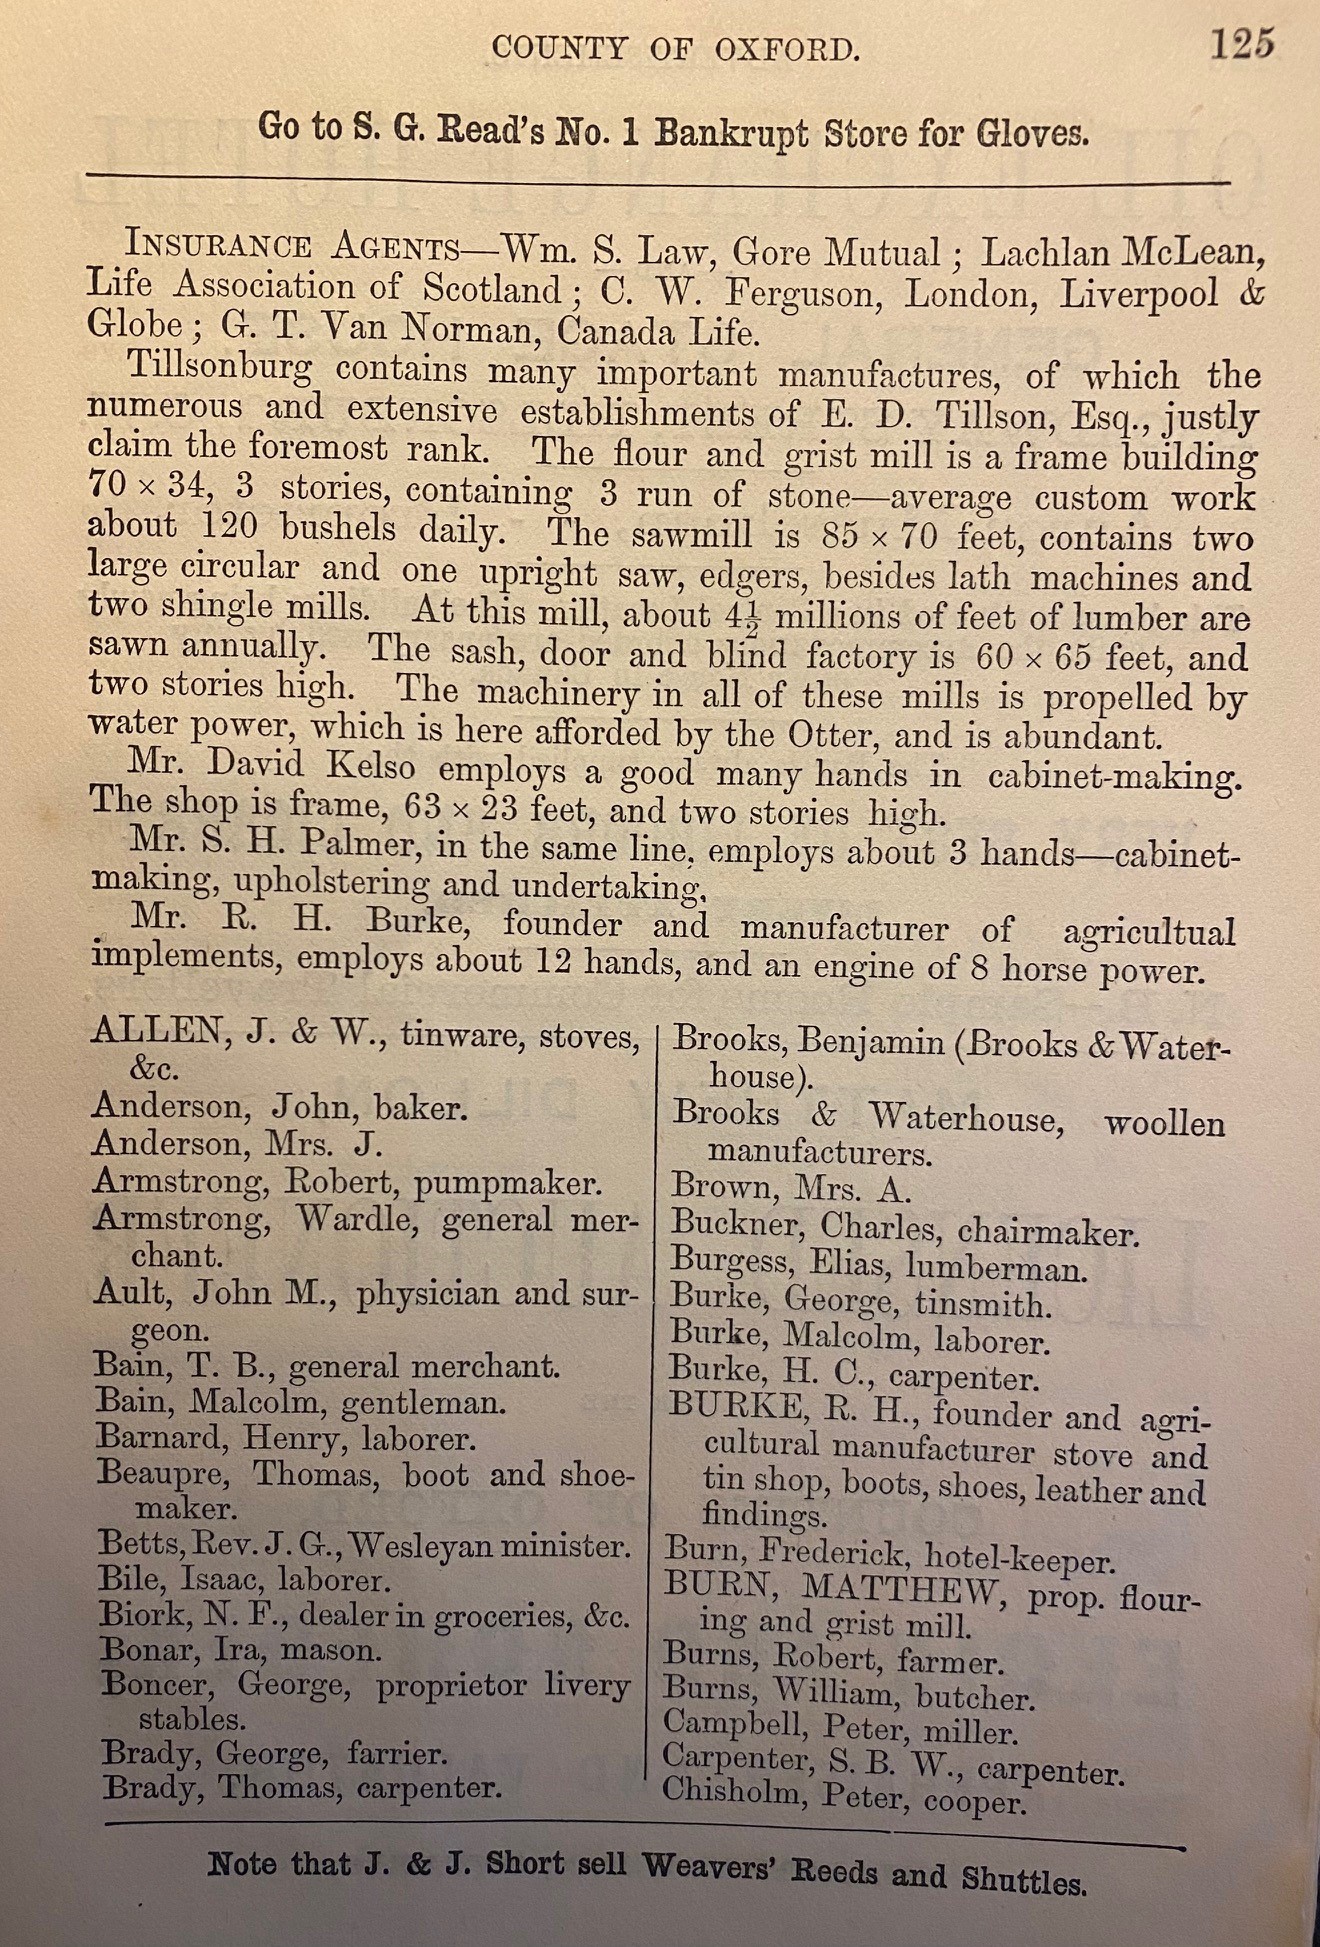 Page from the Oxford County 1870-71 directory featuring R.H. Burke and other business owners.